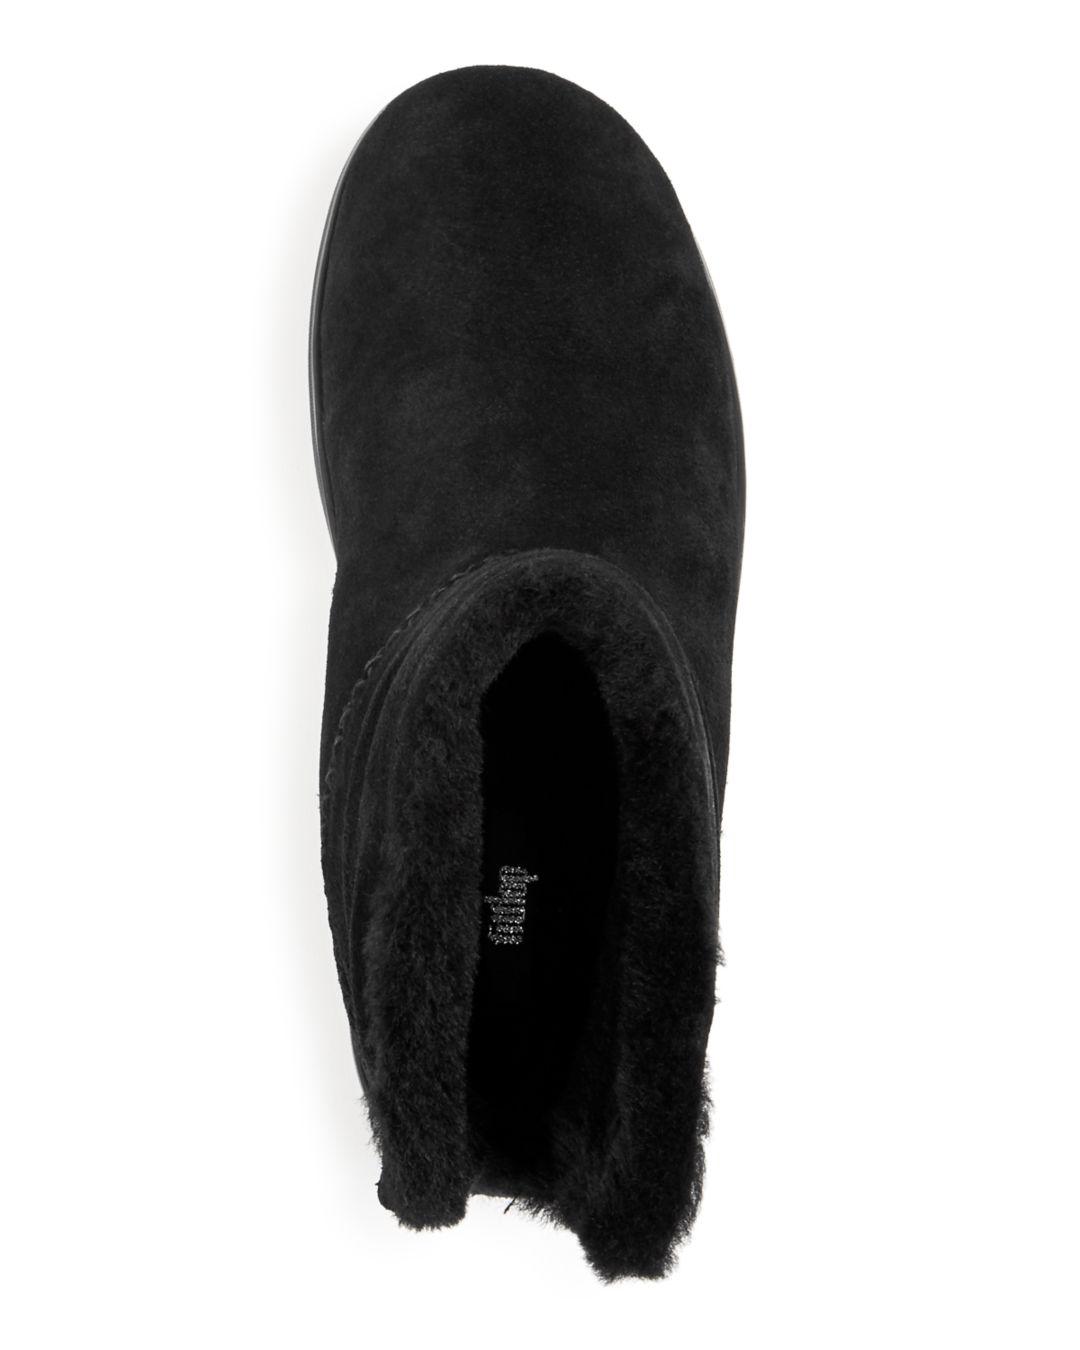 Fitflop Rubber Women's Mukluk Shorty Iii Shearling Boots in Black | Lyst